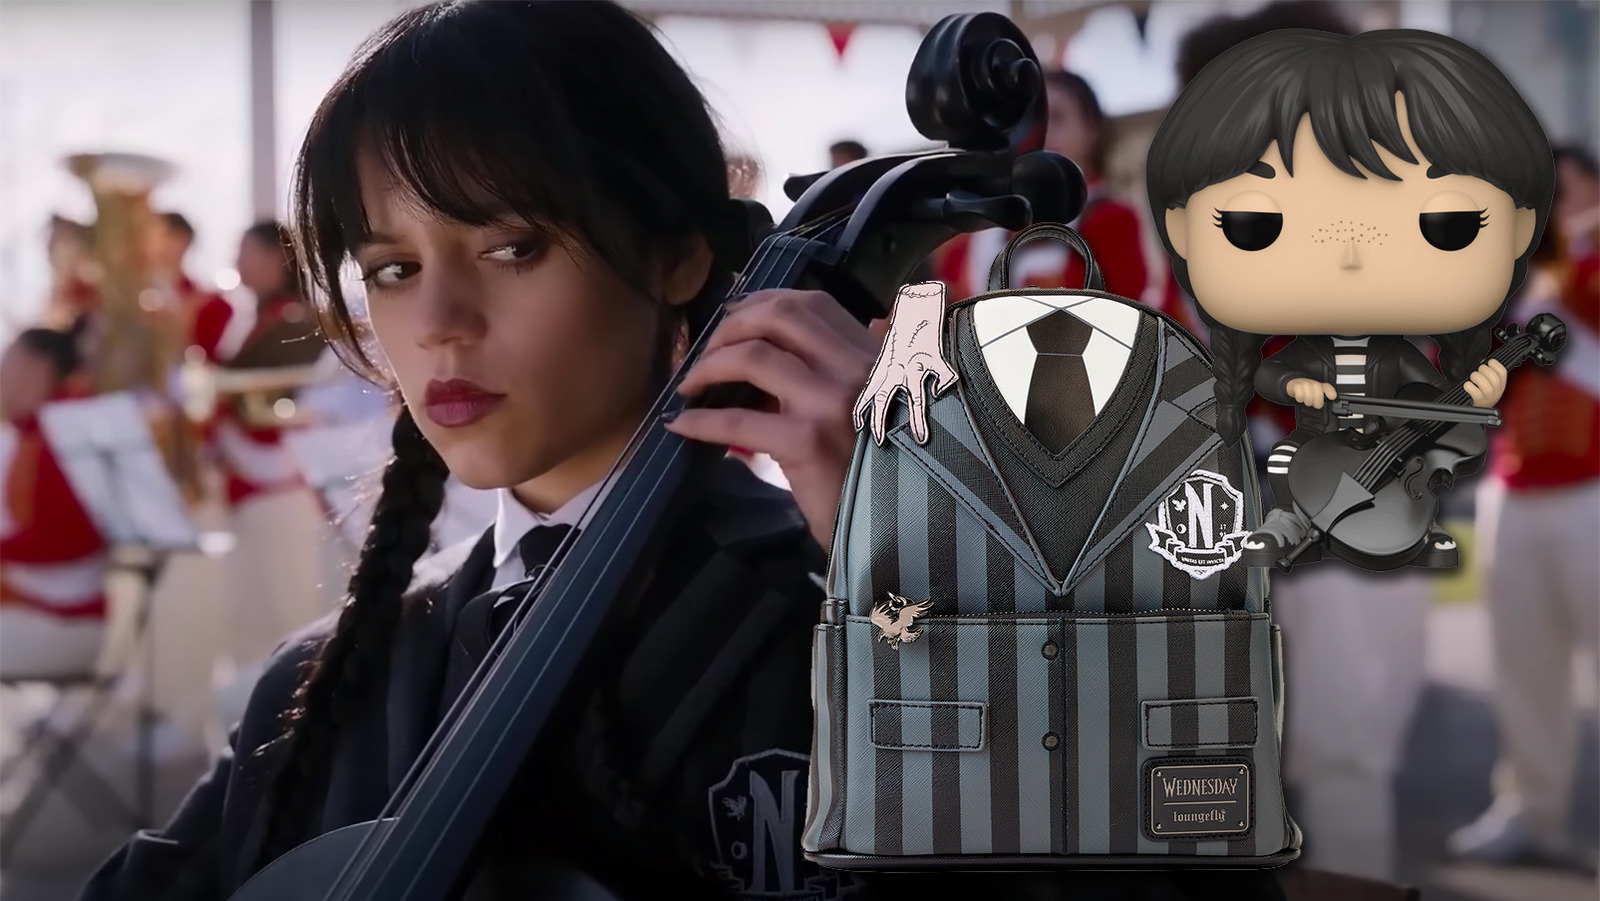 Cool Stuff: Wednesday Funko POPs & Loungefly Bags Bring Jenna Ortega's Goth Style Home